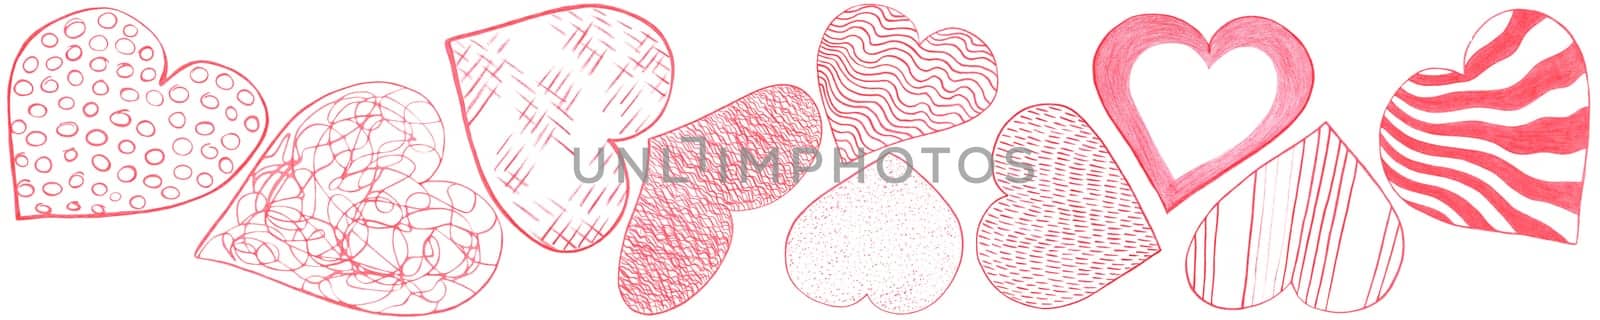 Set of Red Hearts Drawn by Colored Pencil. Heart Shape Isolated on White Background. by Rina_Dozornaya